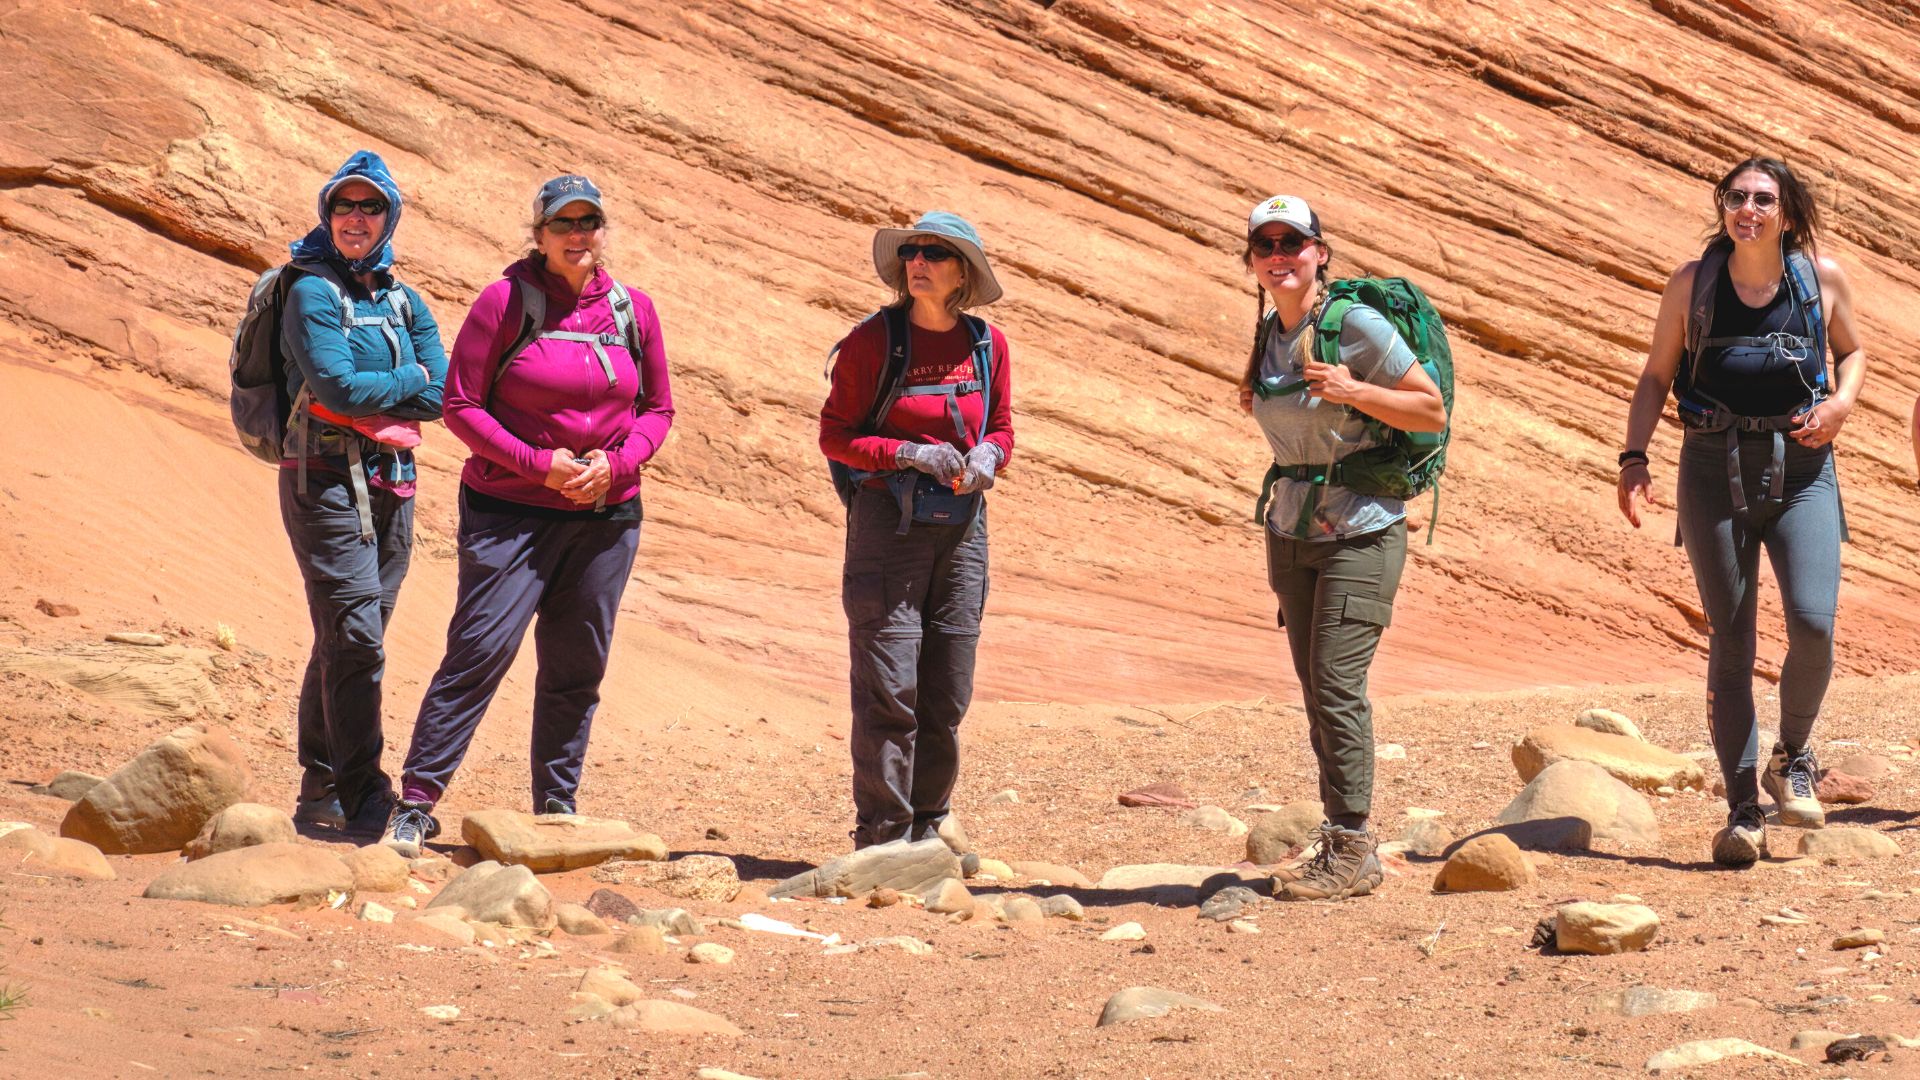 Four hikers and a guide pose in red rock country wearing baseball caps, sunglasses, and daypacks